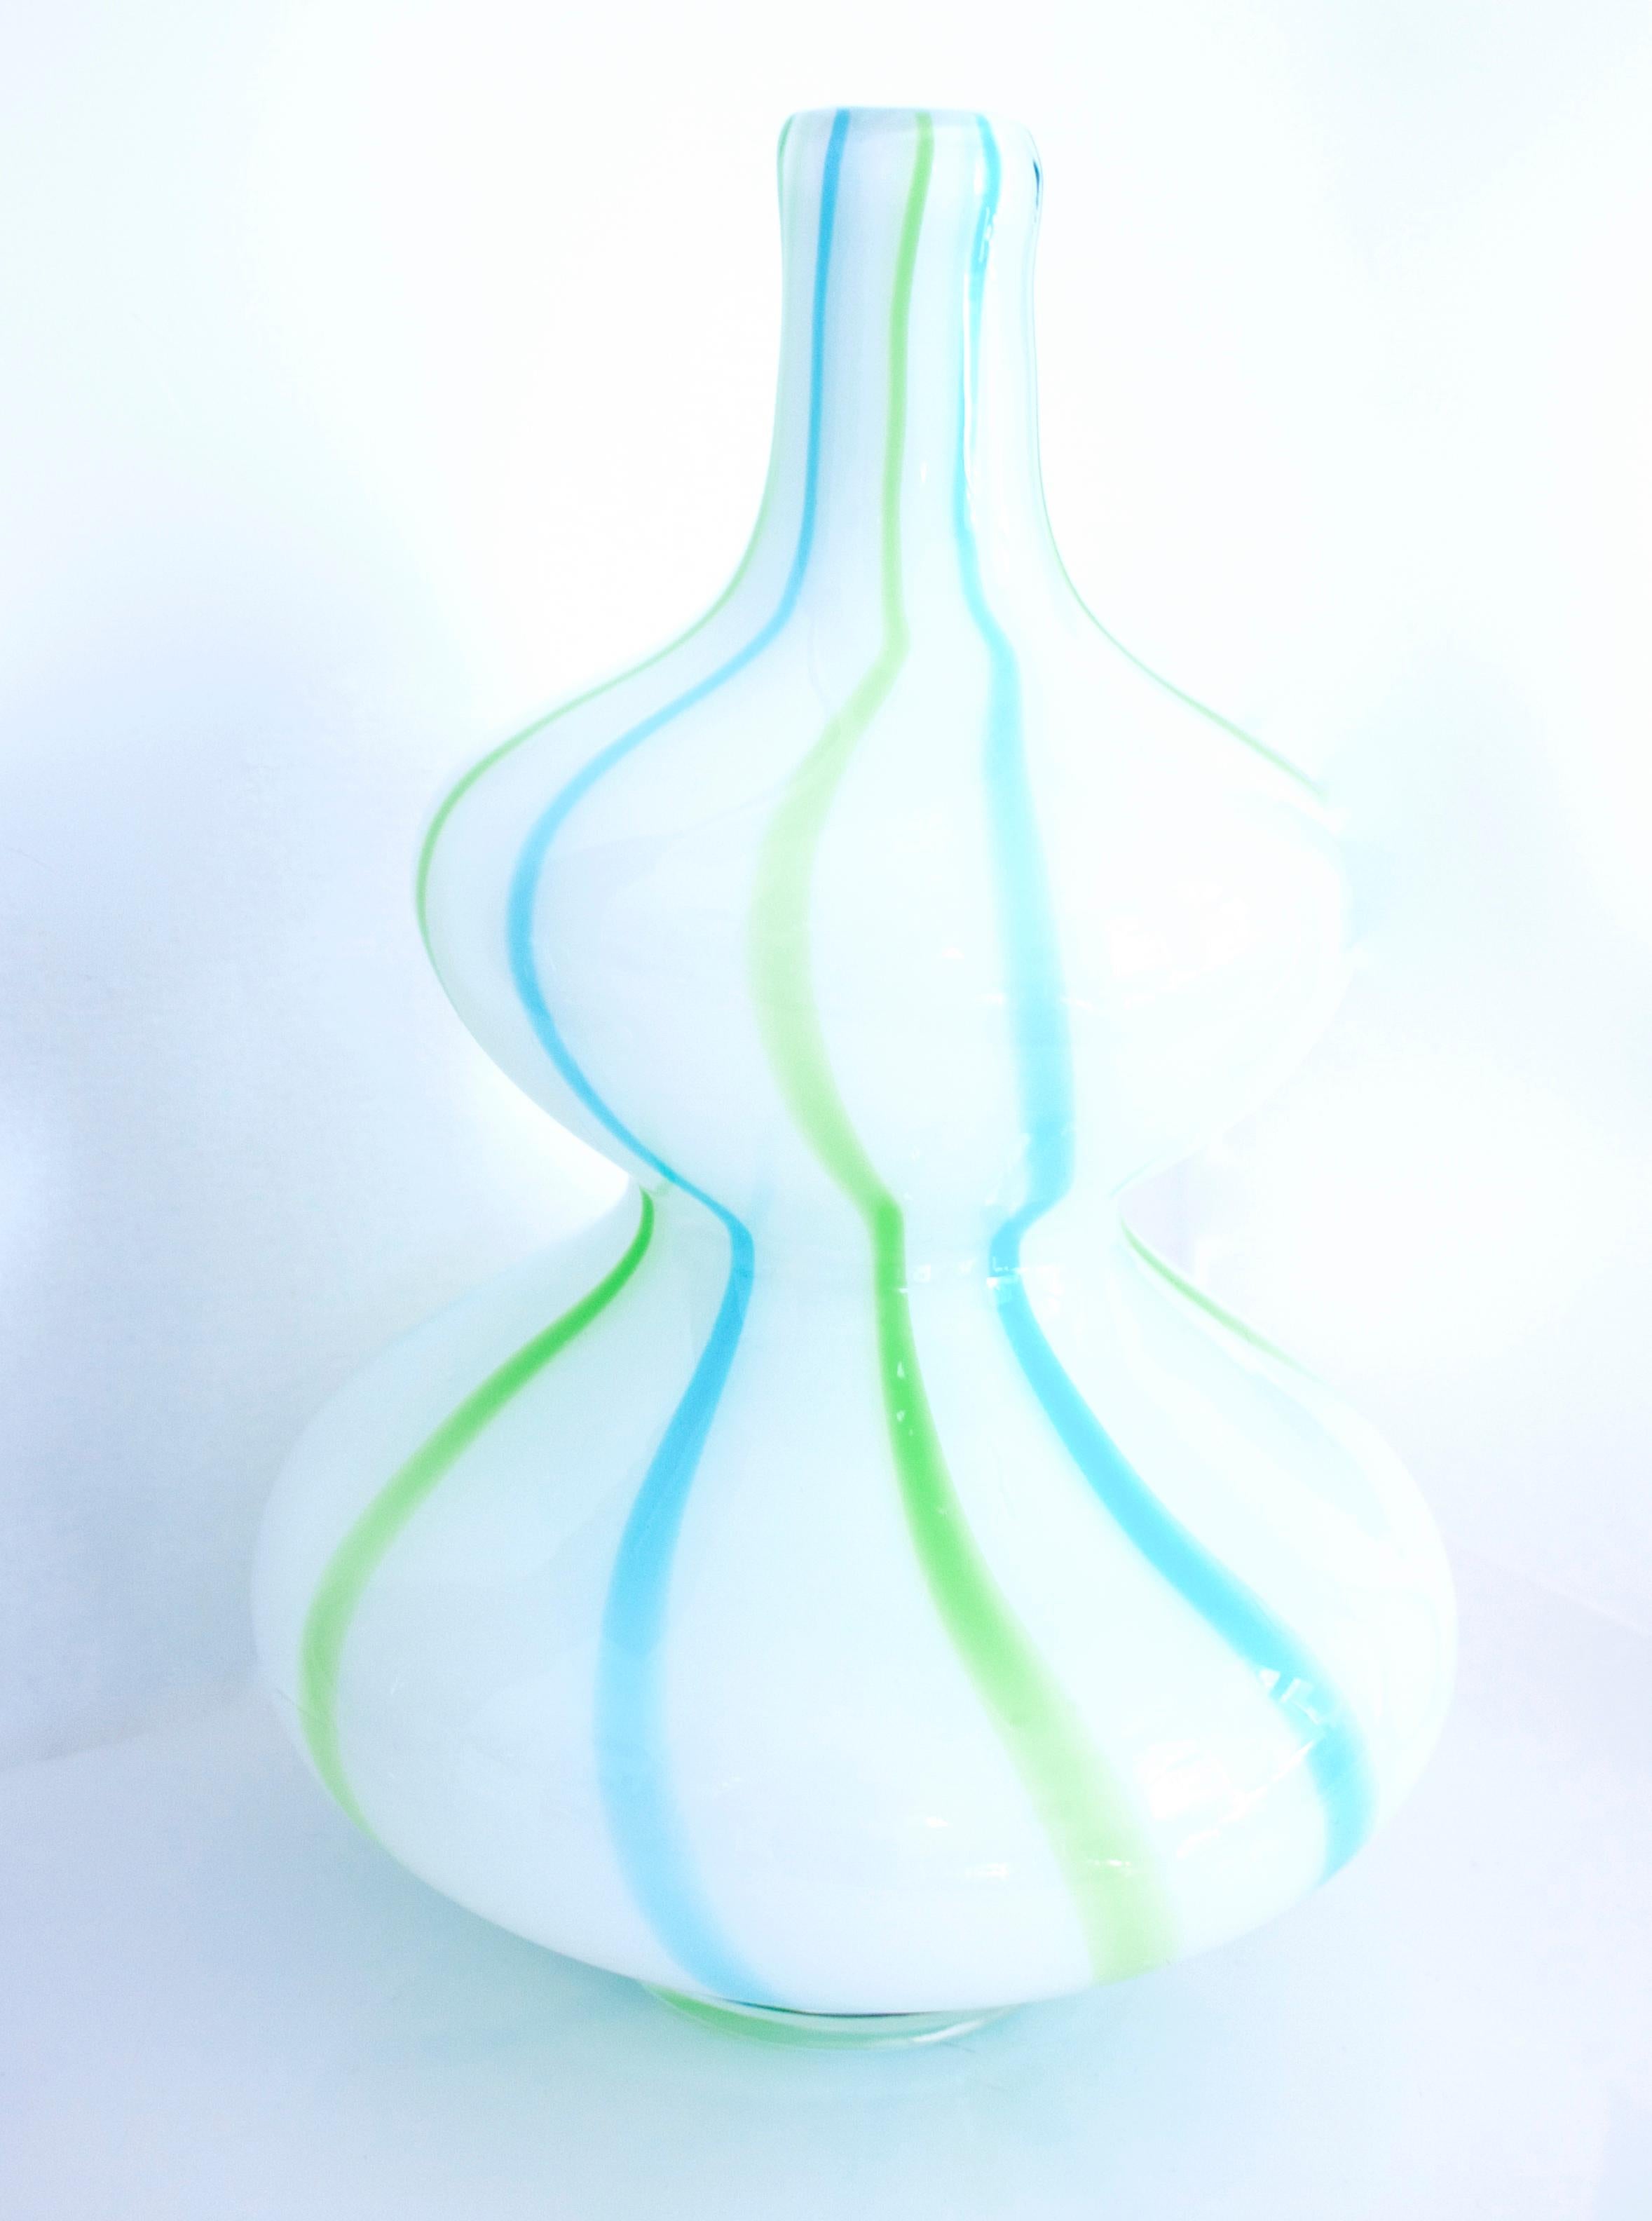 Empoli cased glass popular during the 1950s-1960s, when they began to produce brightly, vibrant glass cased comprising a layer of clear glass and an internal layer of opaque white 'Lattimo glass. The double hooped vase by Vetrerie di Empoli is